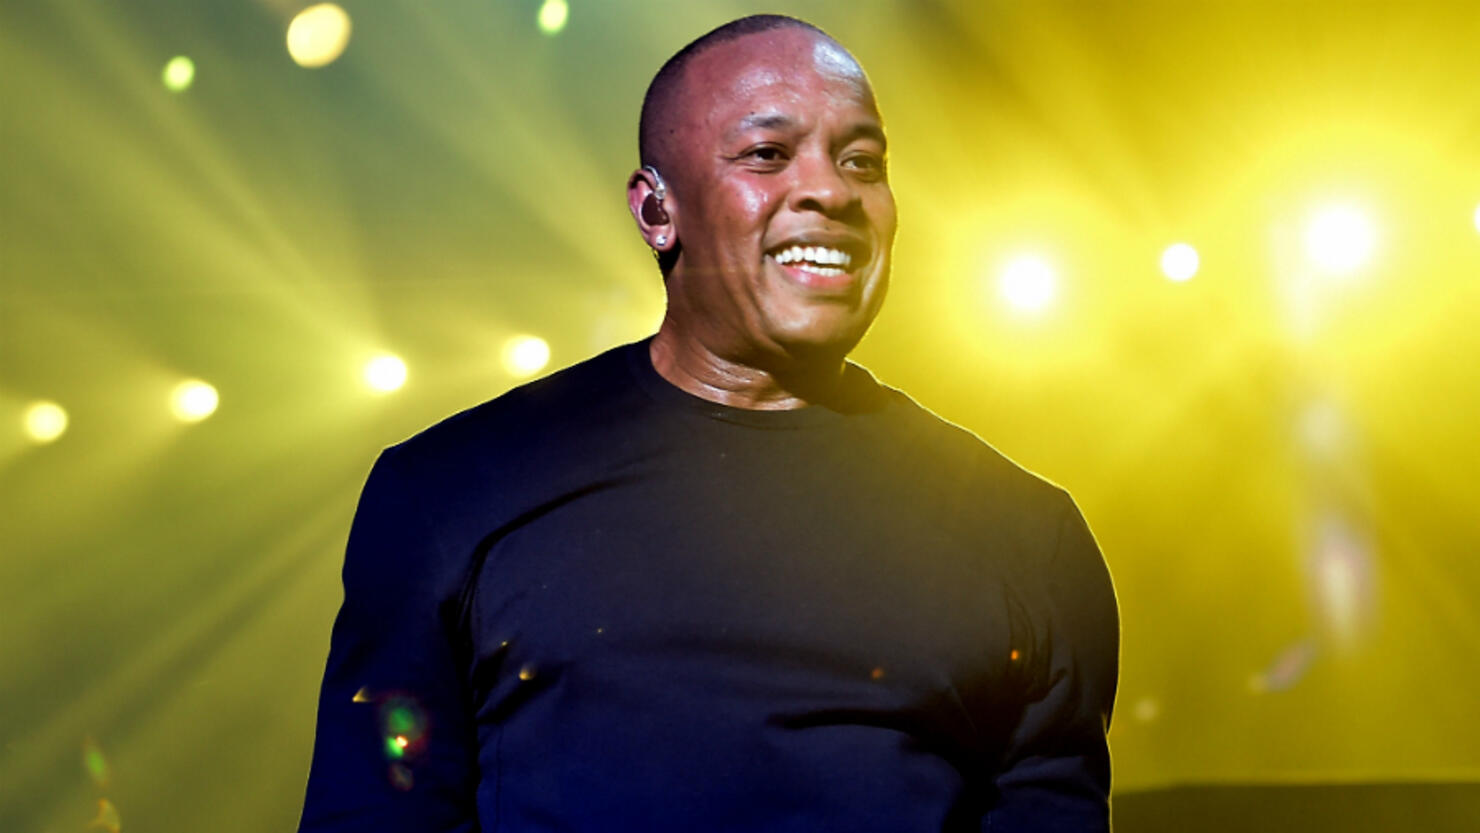 Dr. Dre Released From Hospital After Suffering Brain